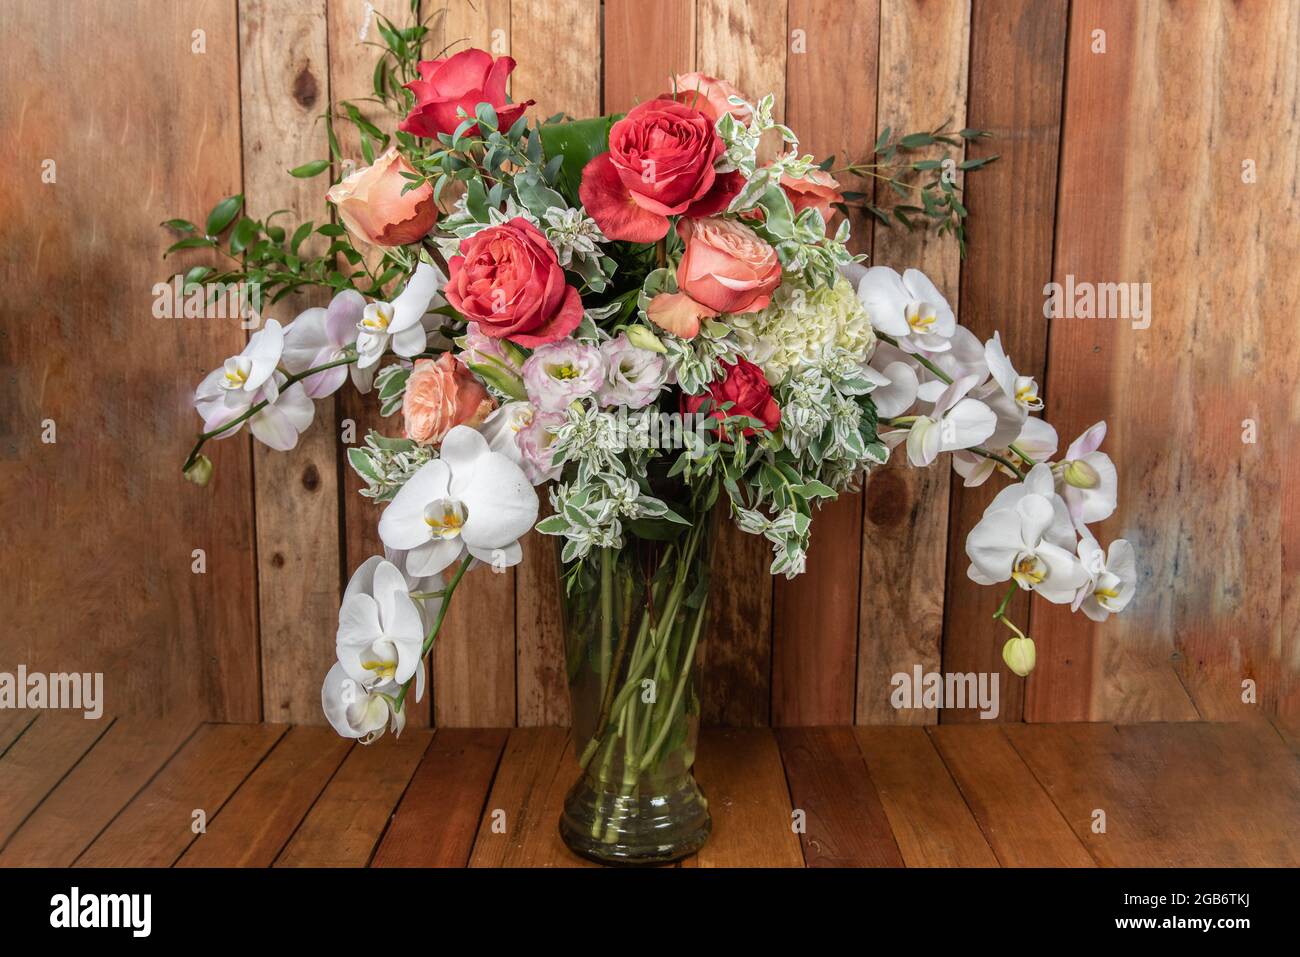 Beautiful bouquet of arranged roses, orchids, and filler leavesto create an expressive sentiment of flowers. Stock Photo